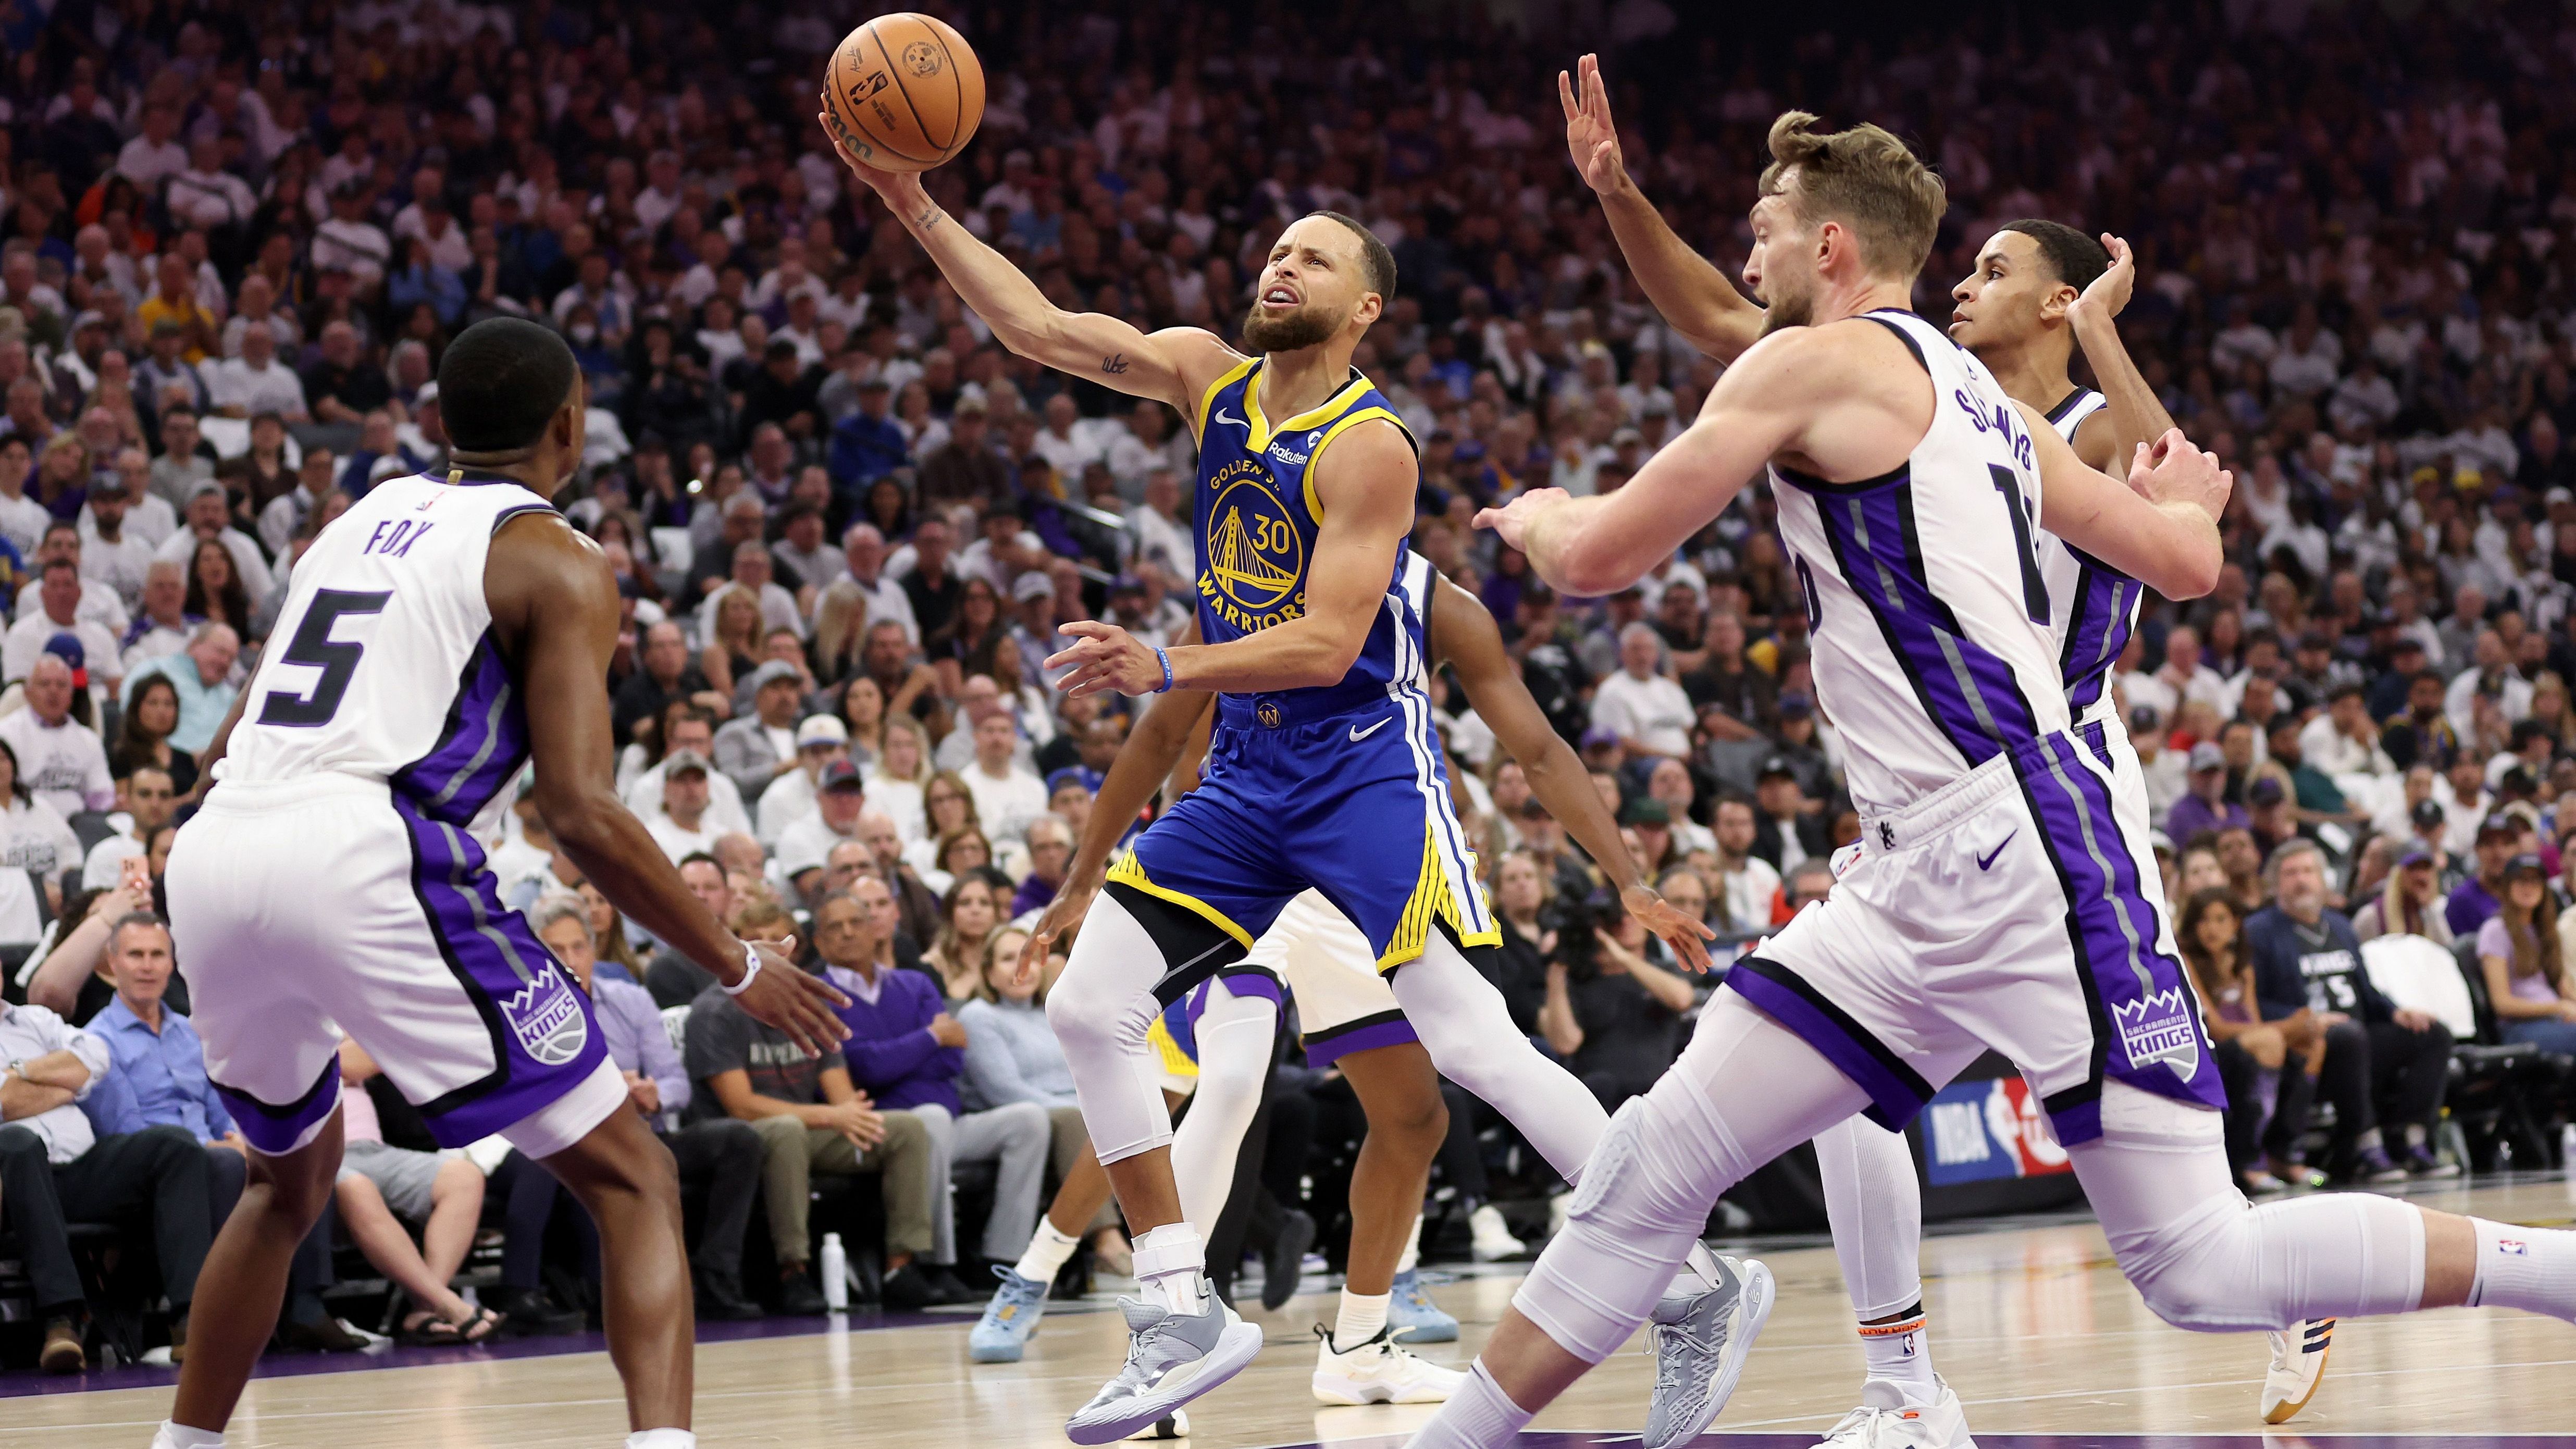 <strong>Stephen Curry (Golden State Warriors)</strong><br>Kategorie: Clutch Player of the Year<br>Position: Guard<br>Stats der Regular Season: 26,4 Punkte, 5,1 Assists, 4,5 Rebounds